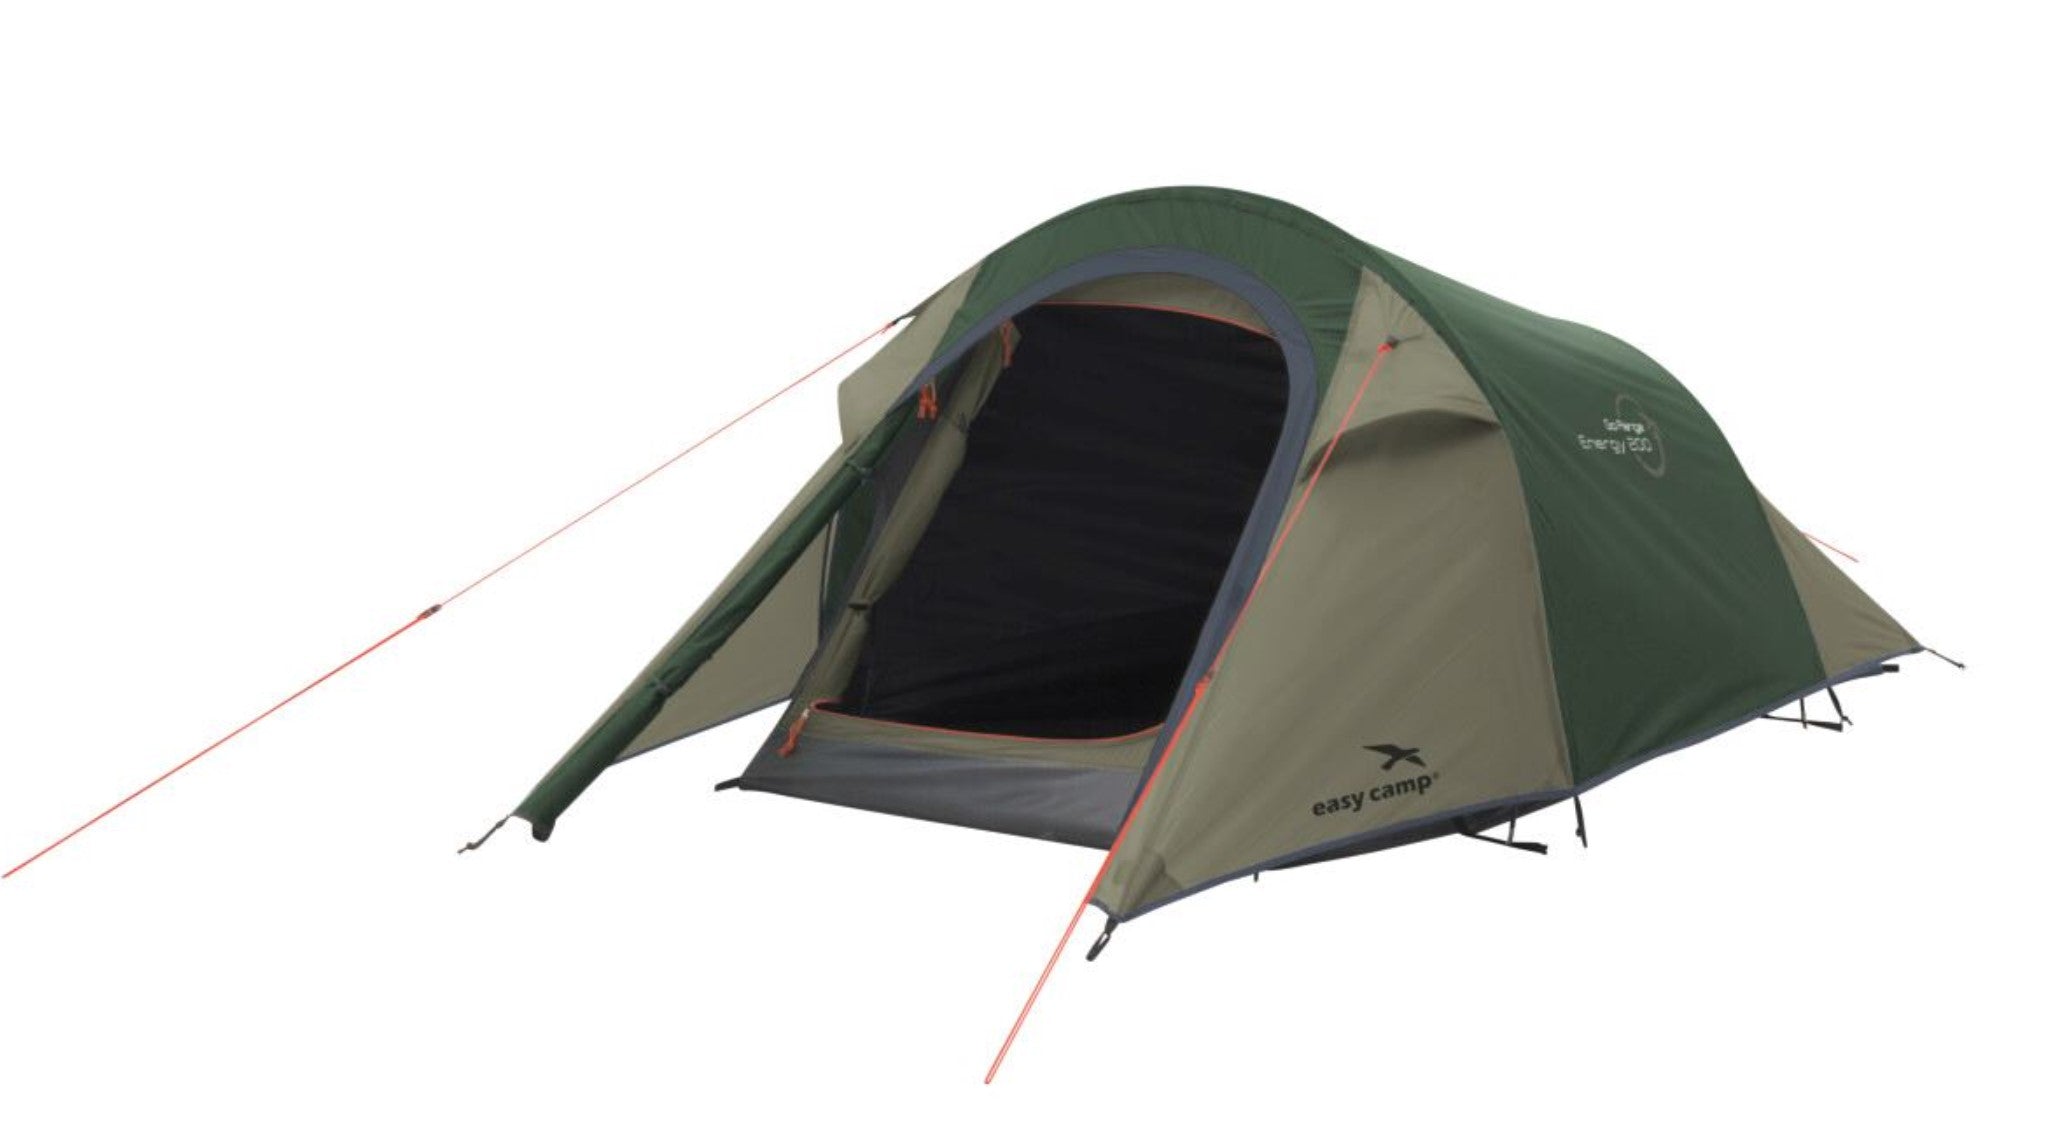 Easy Camp Engery 200 Tent